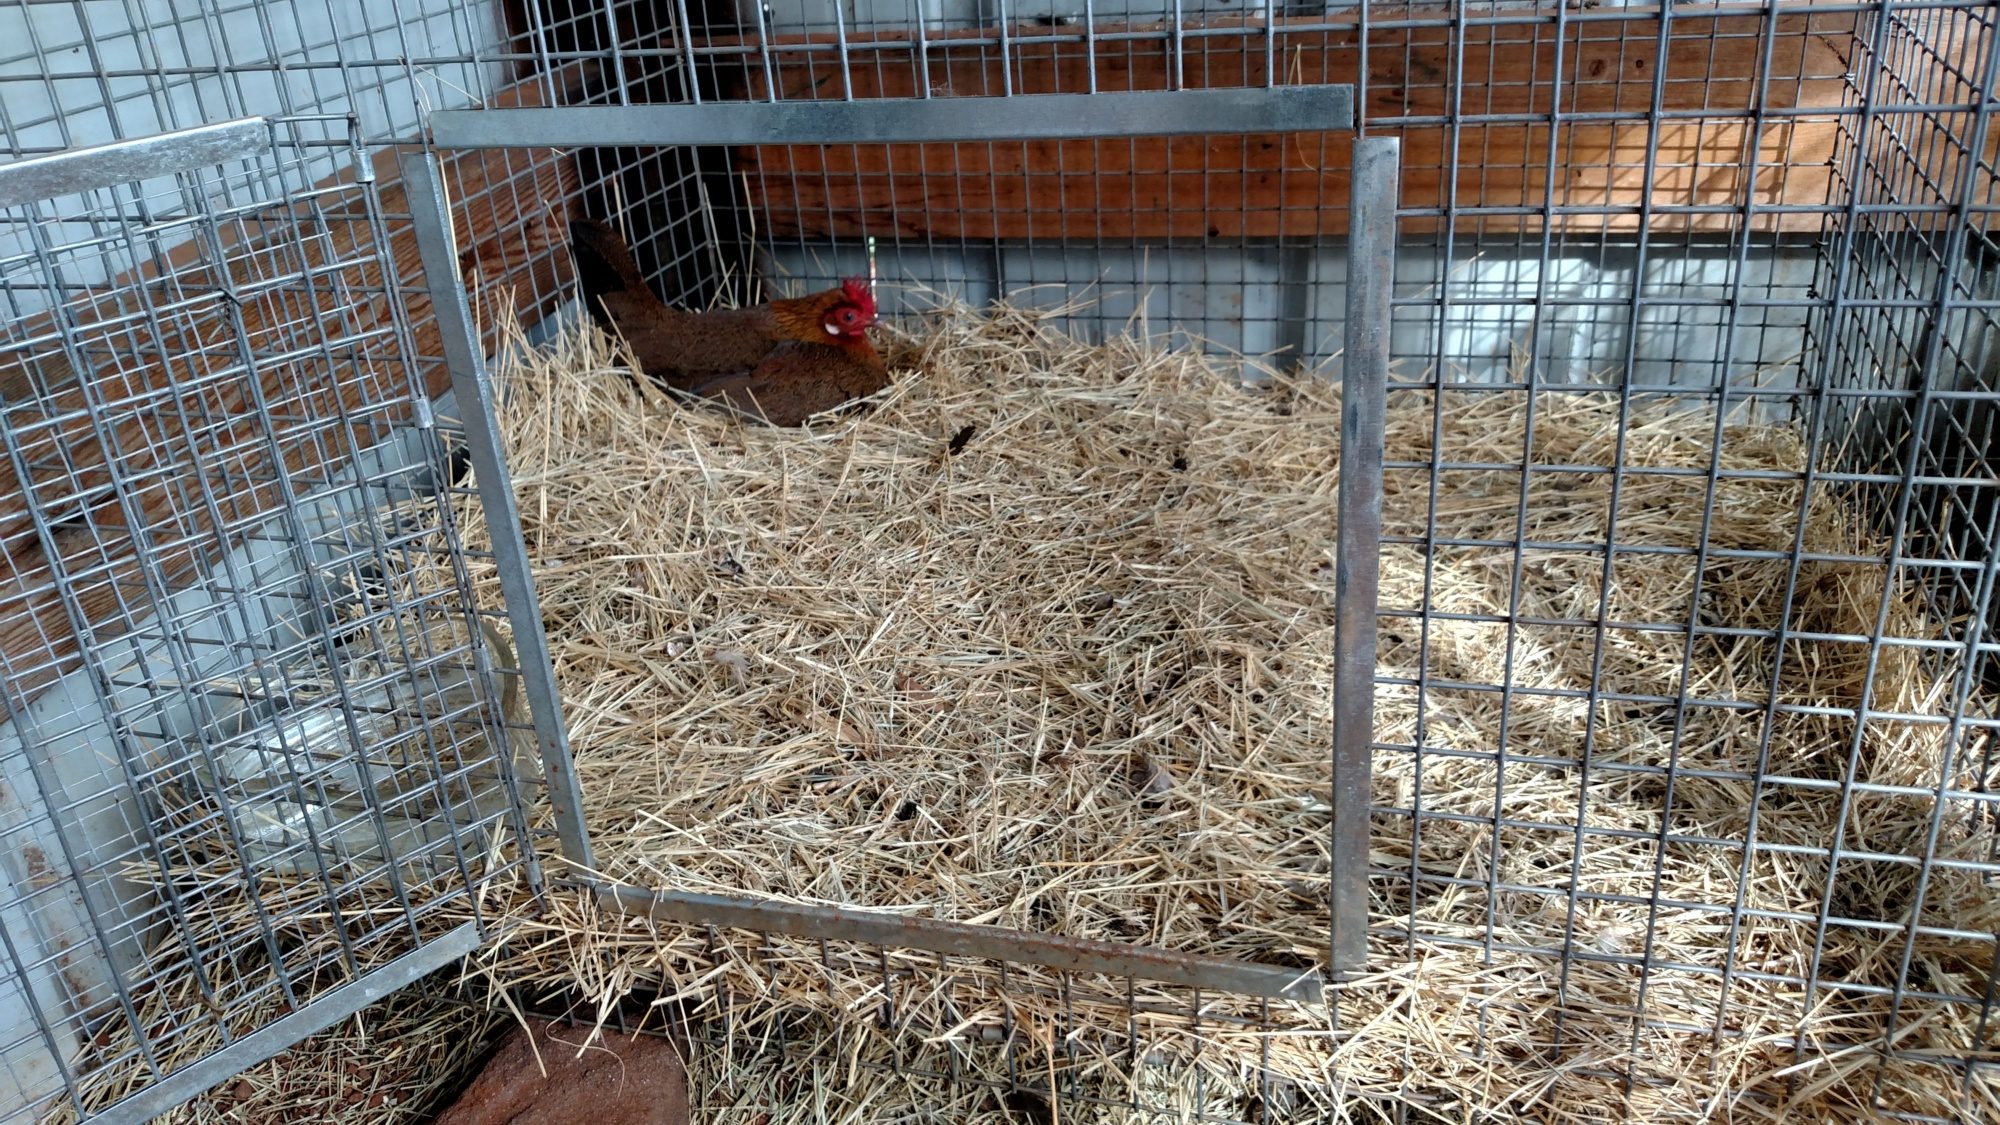 One of my adult hens started sitting on nest two days ago.